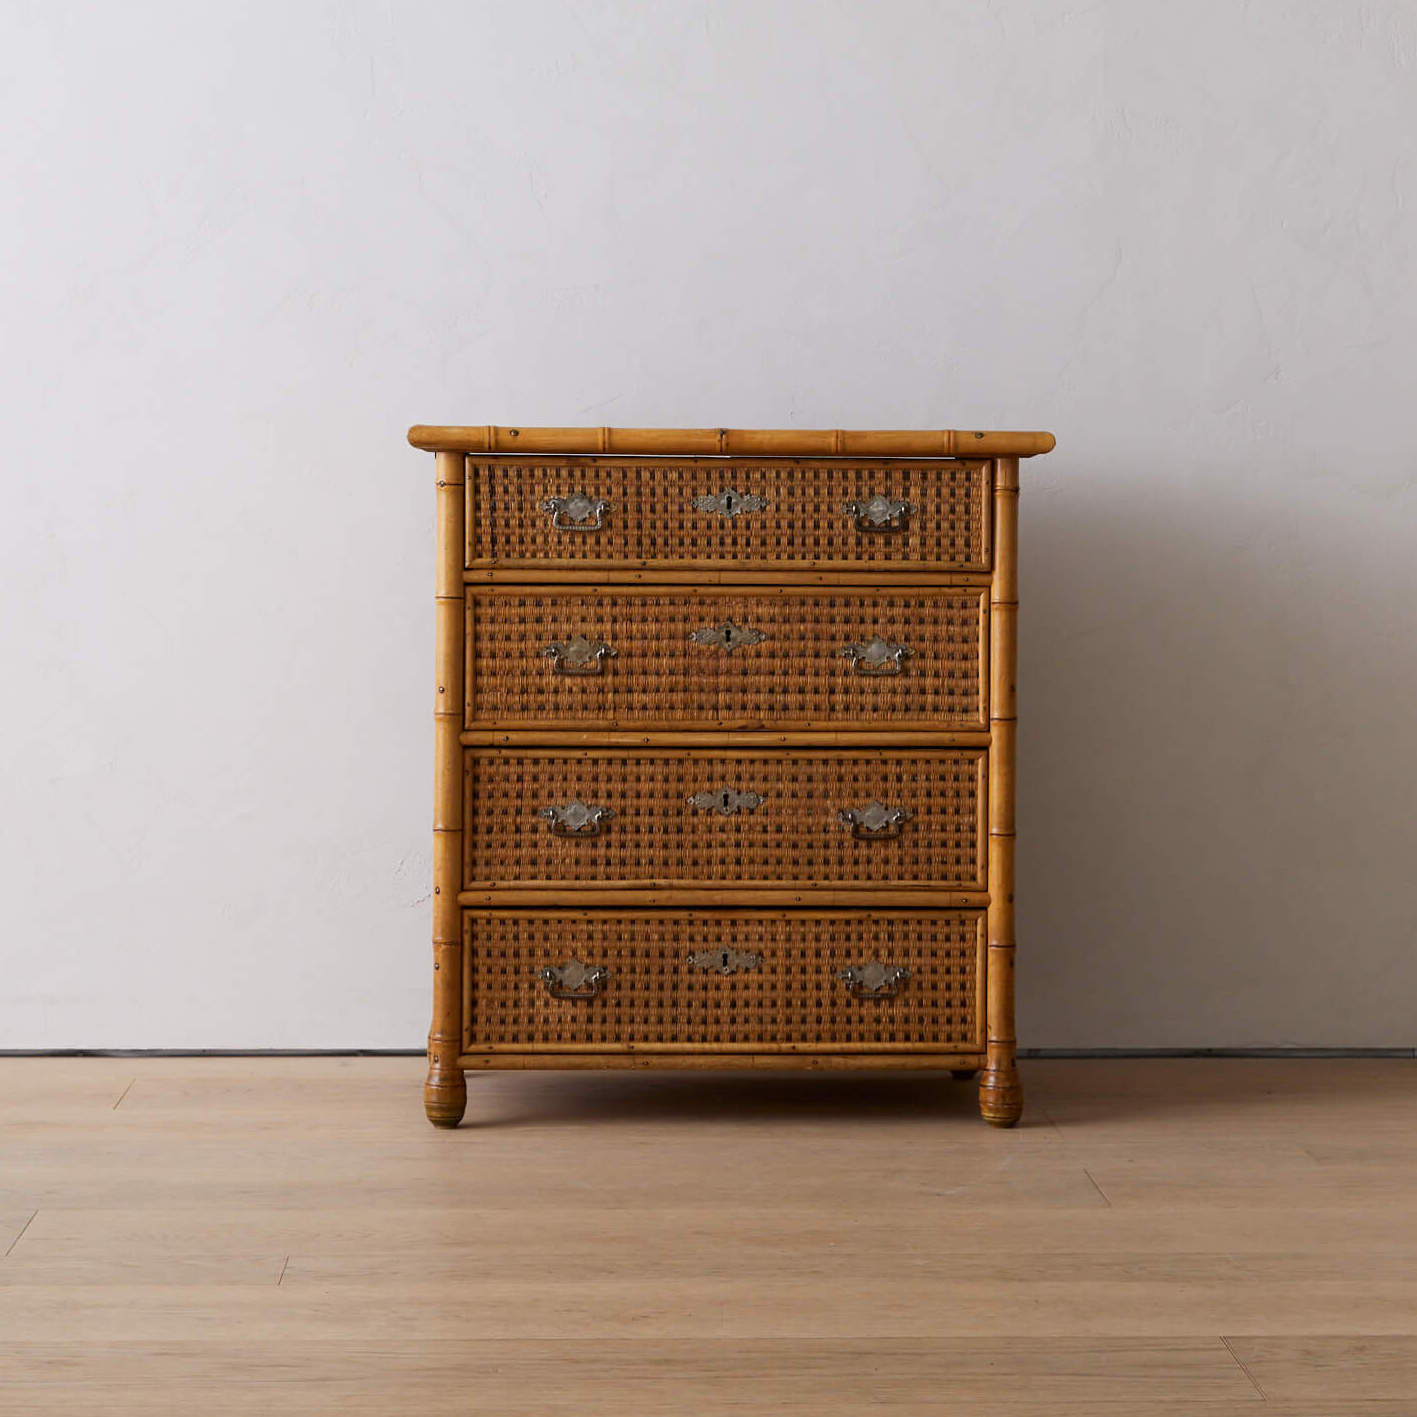 Early 20th century bamboo and rattan chest of drawers